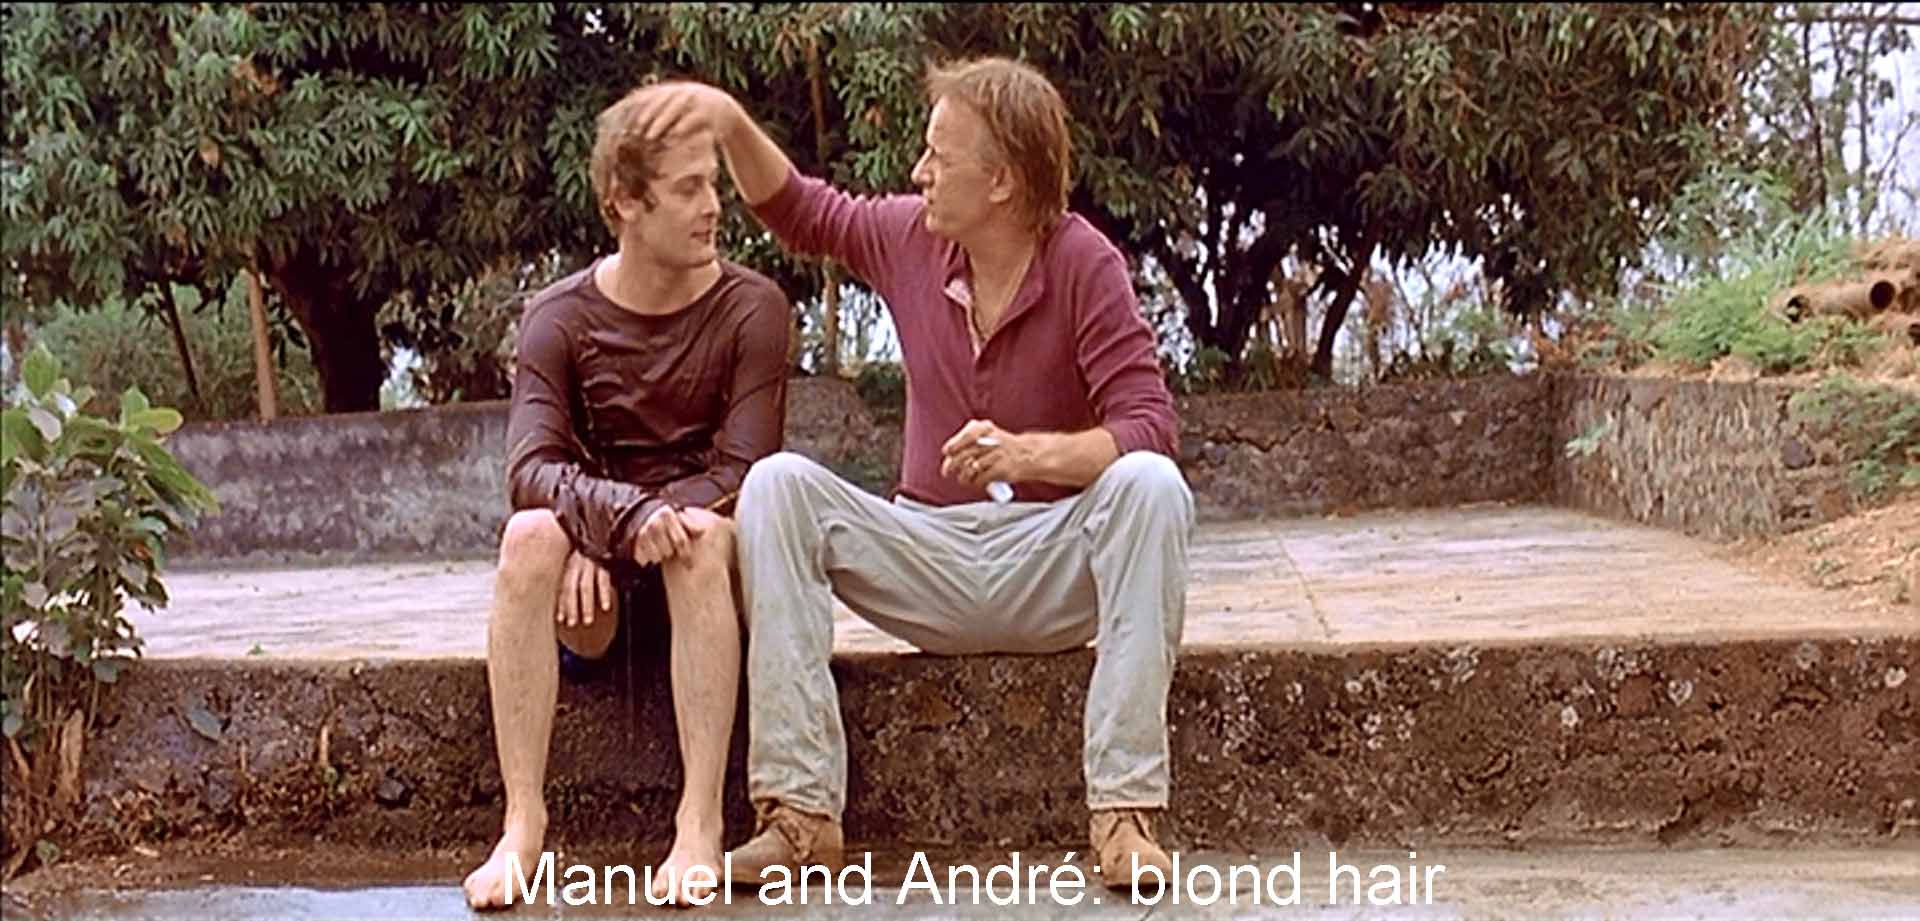 Manuel and Andre: blond hair